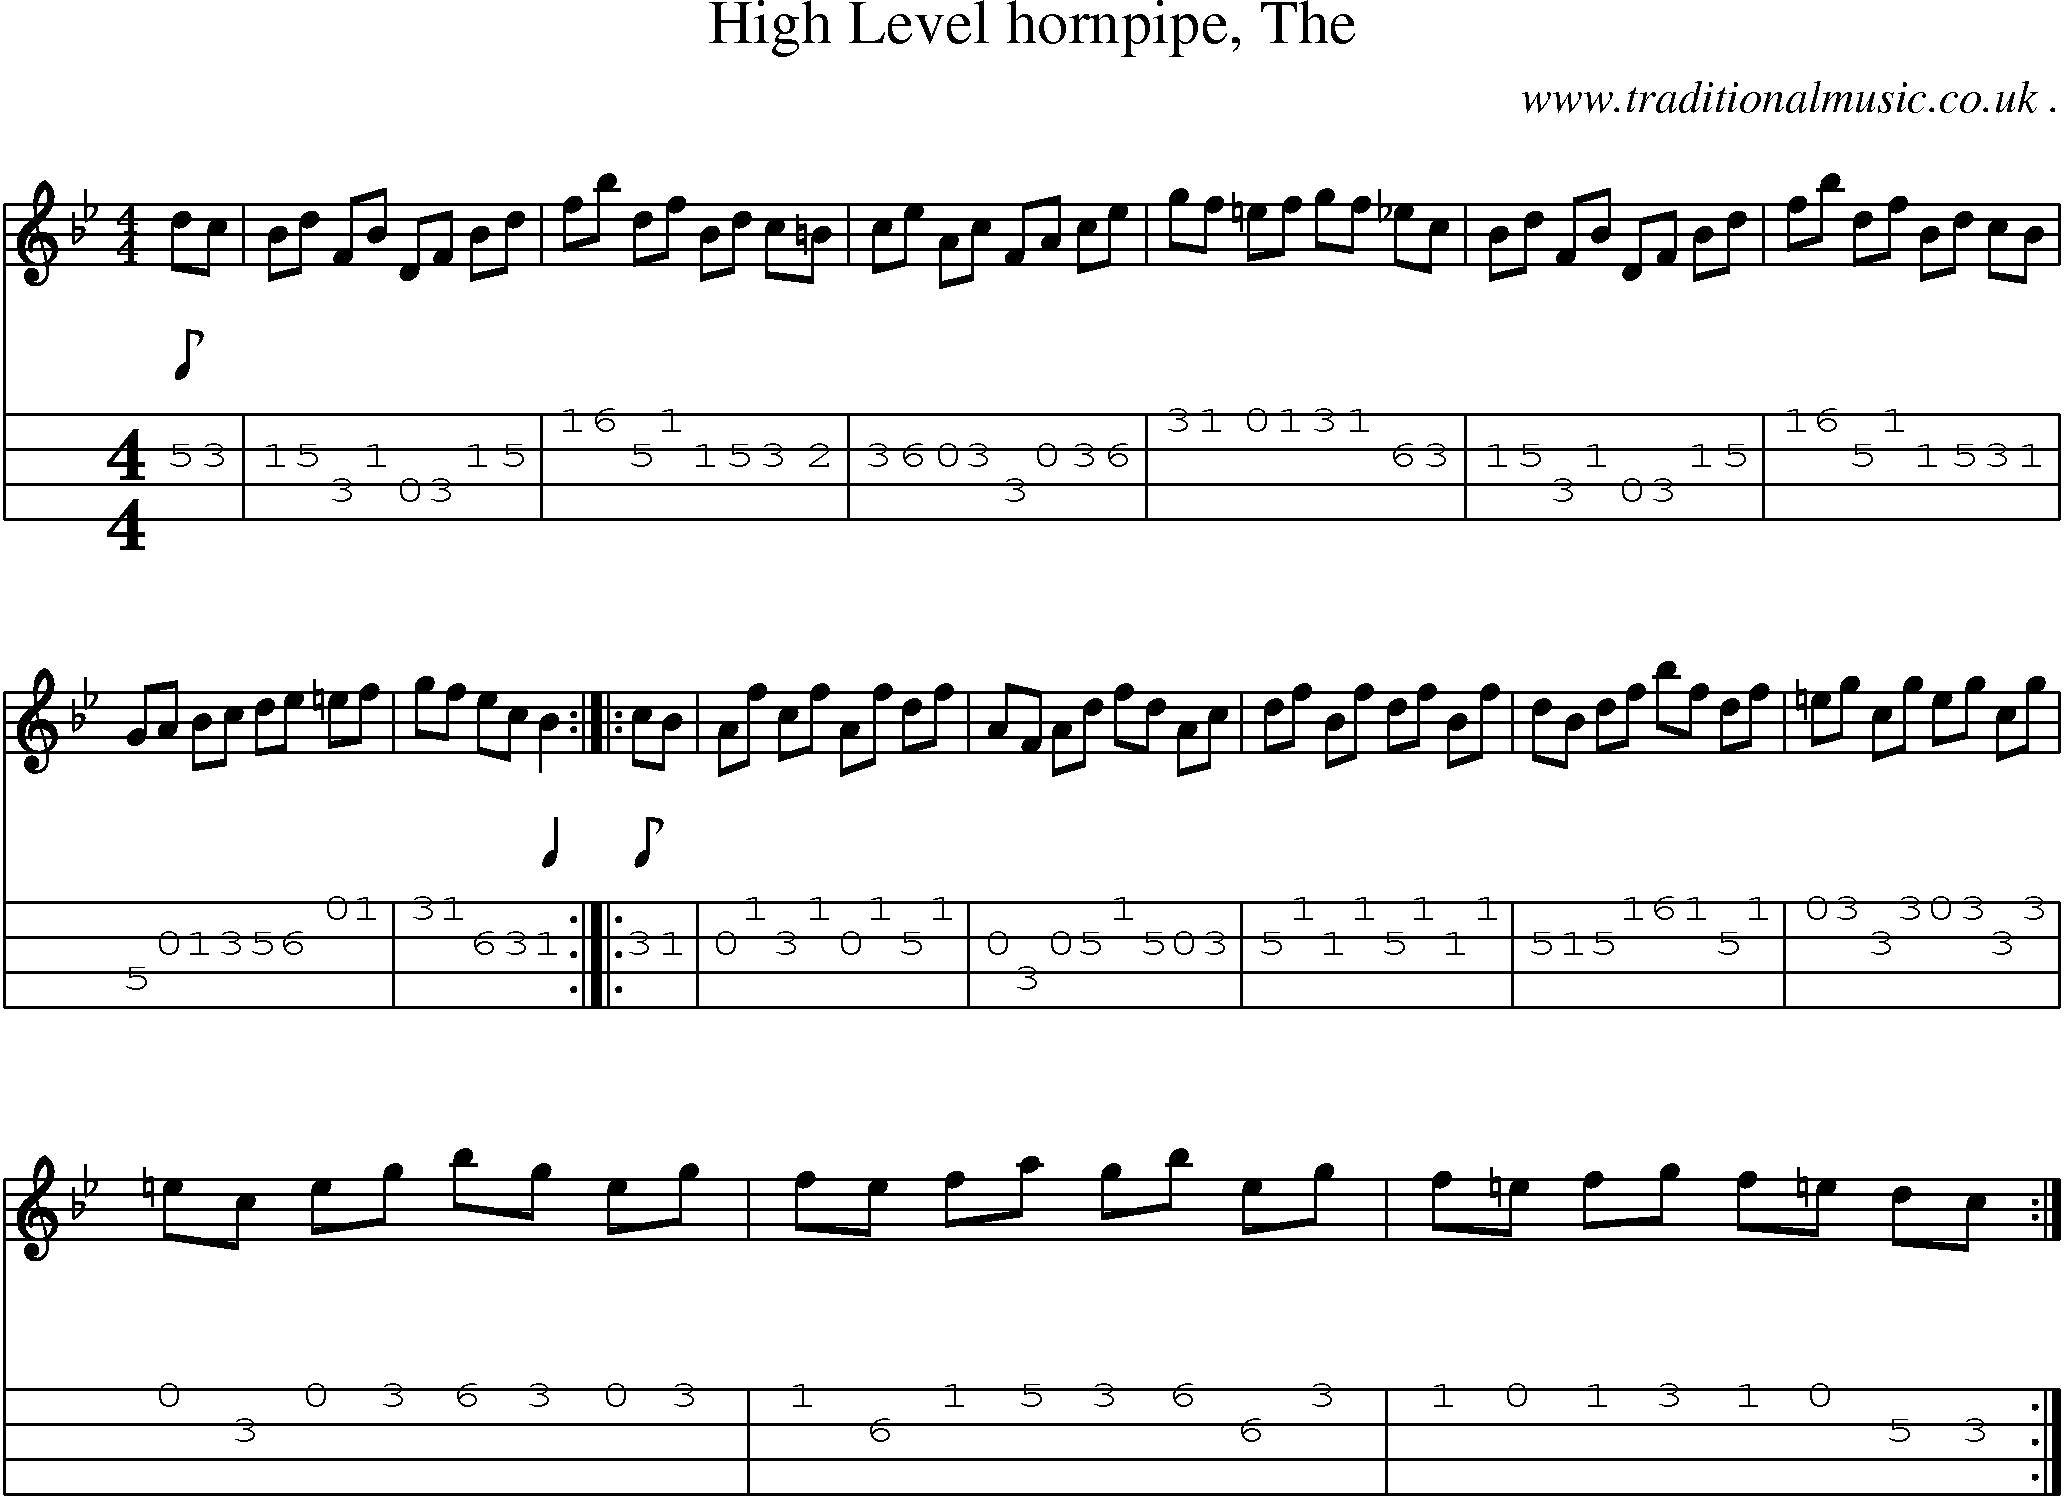 Sheet-music  score, Chords and Mandolin Tabs for High Level Hornpipe The